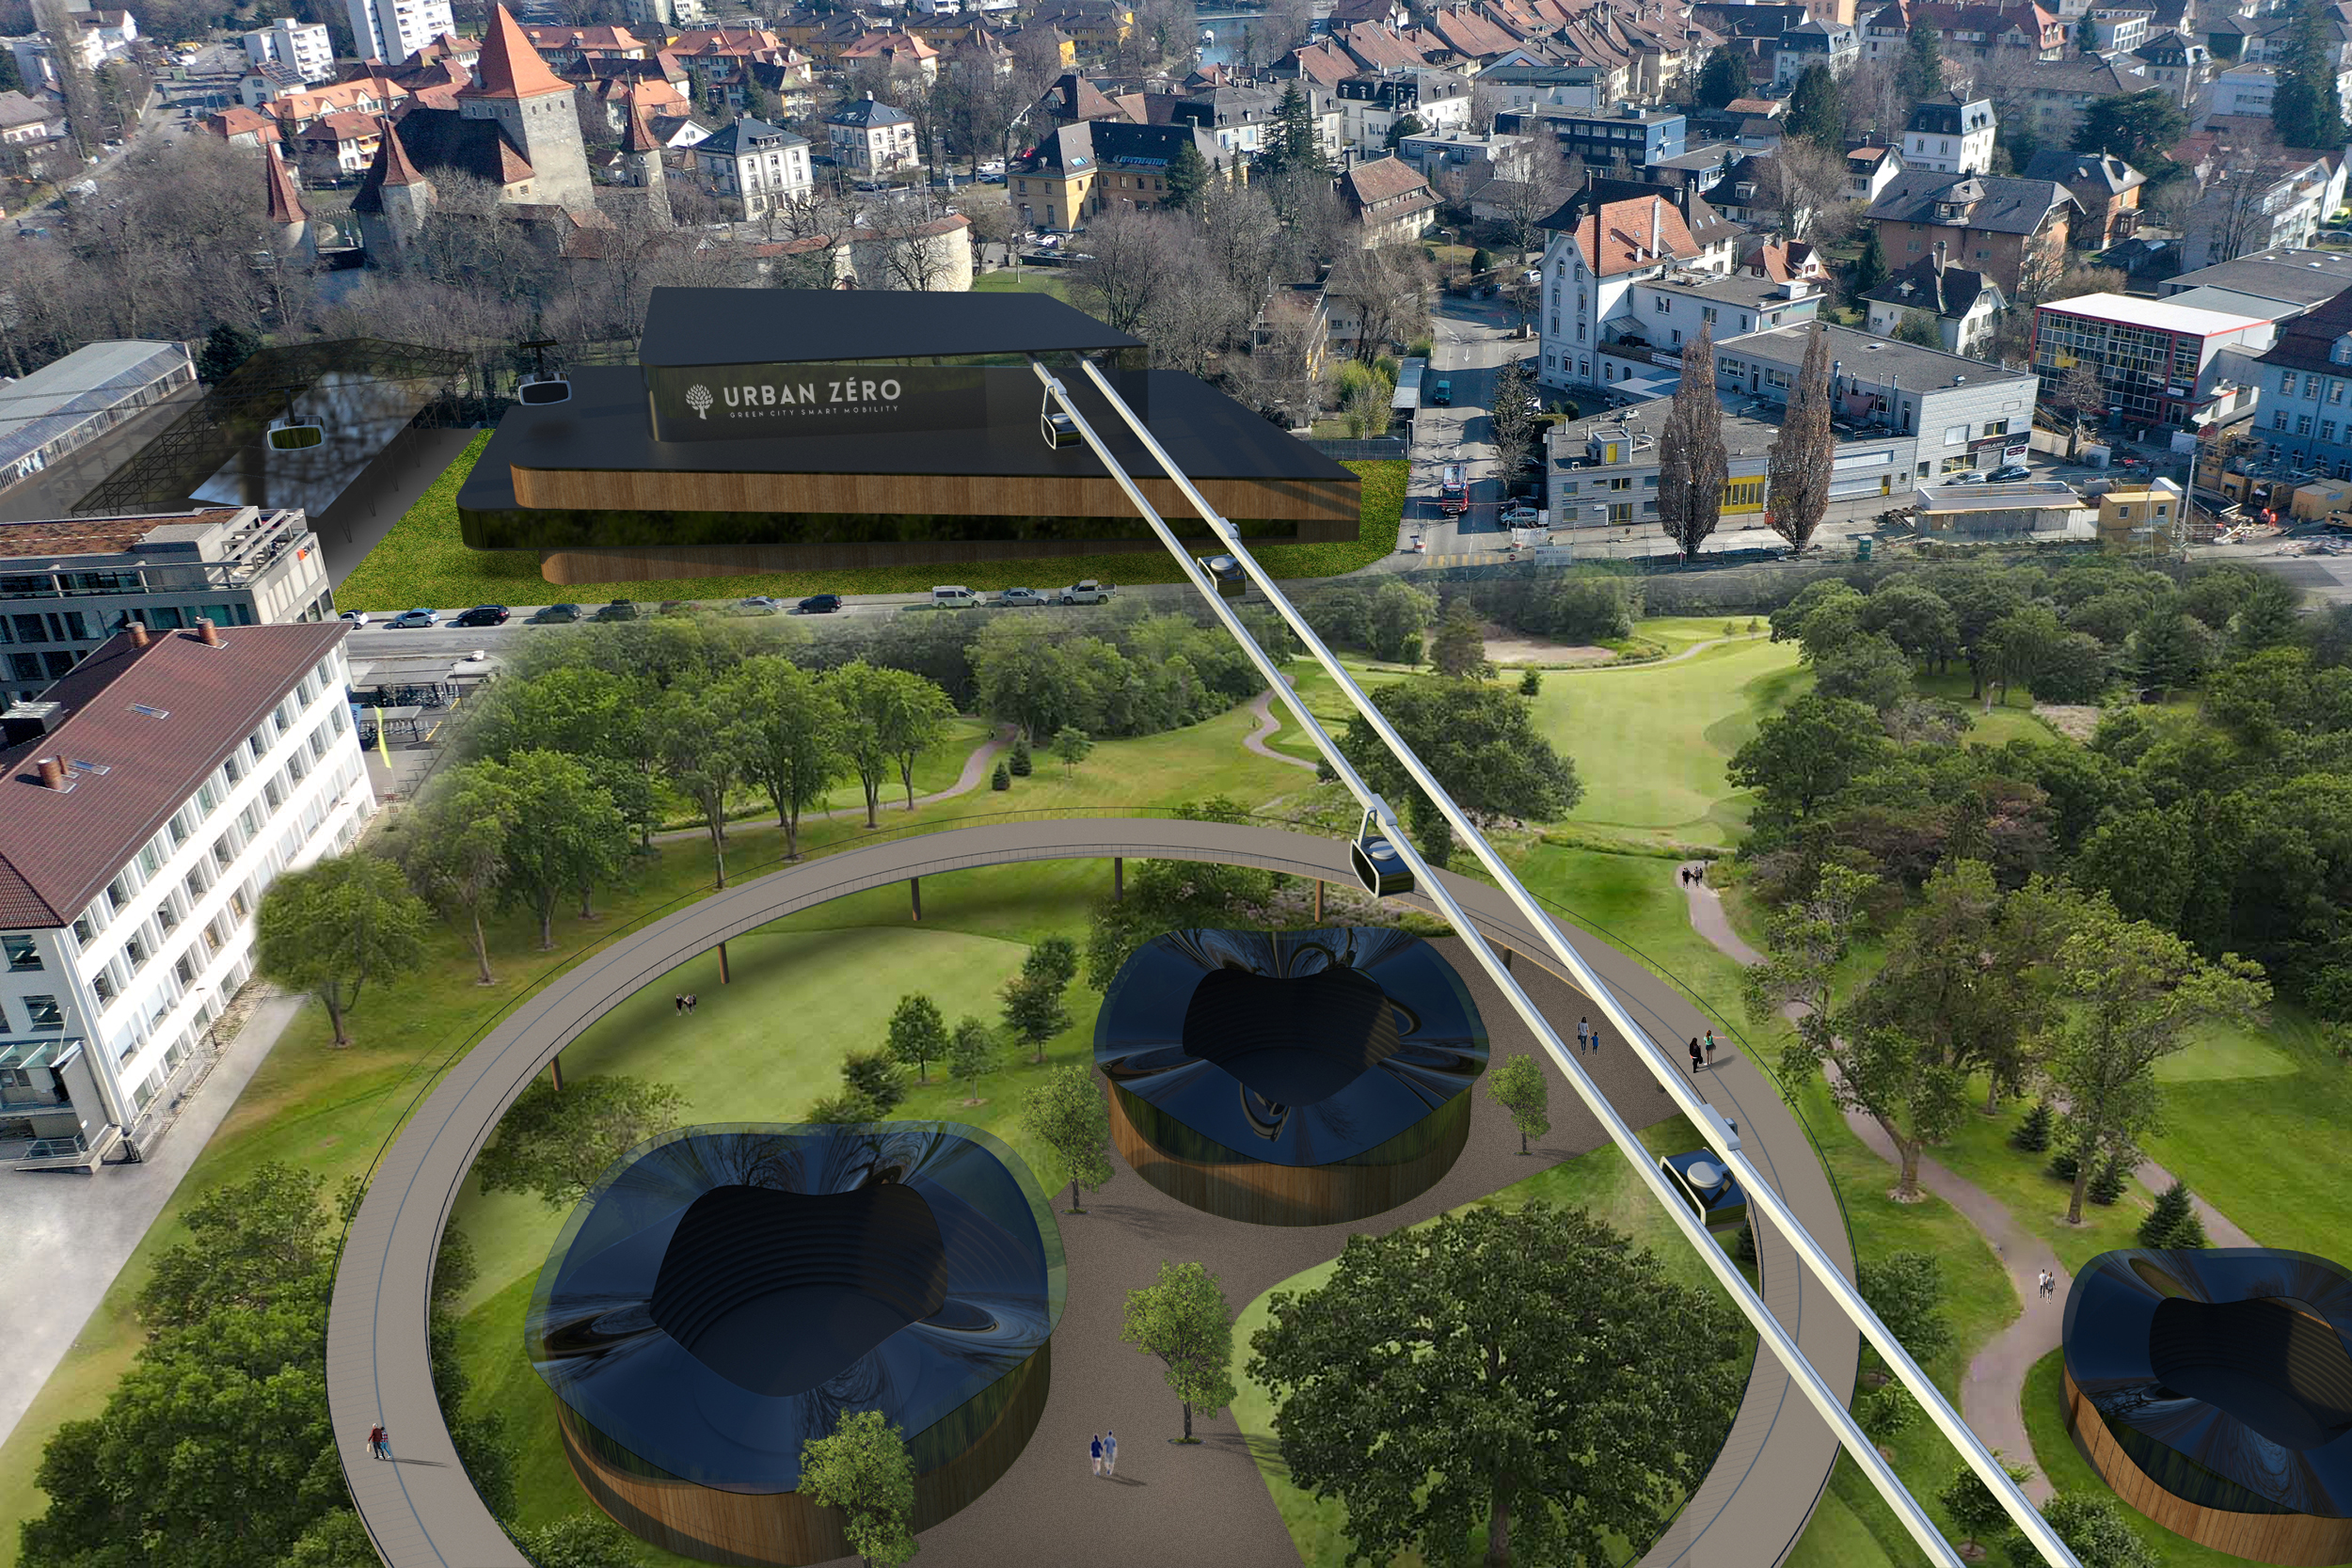 The ropeway station connects the city with the lake. The space is turned into a park with pavillons that can be used year round. A vision by Zeropolis.